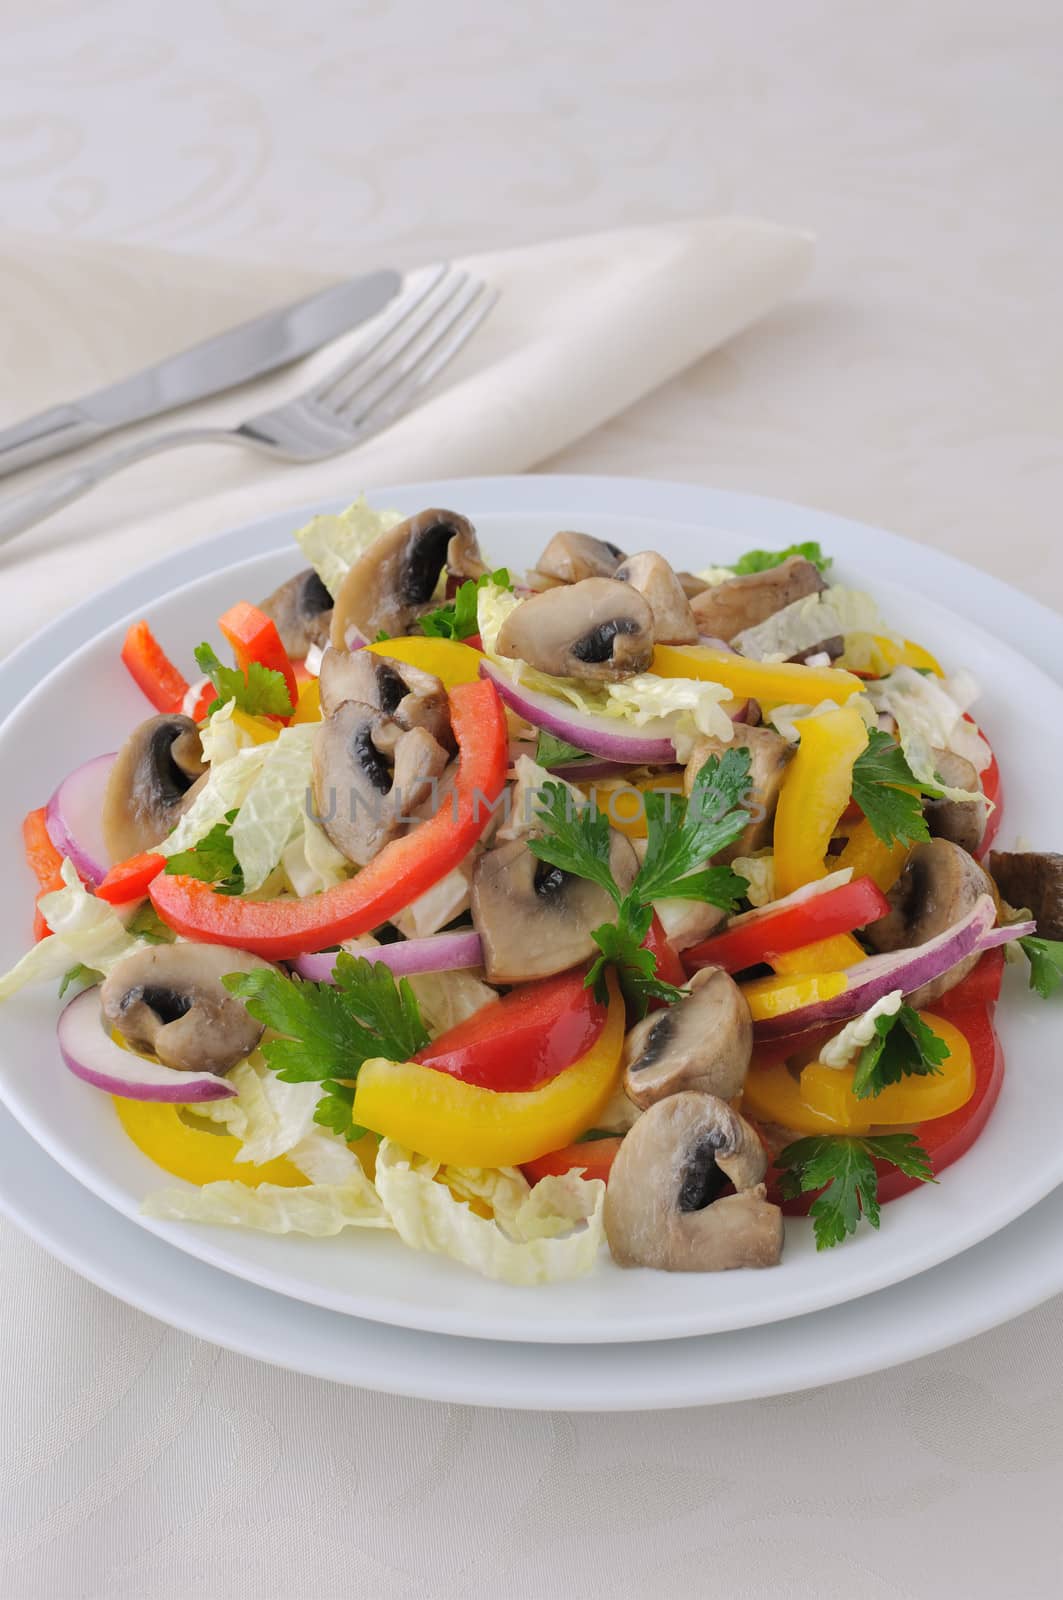 Vegetable salad with mushrooms by Apolonia